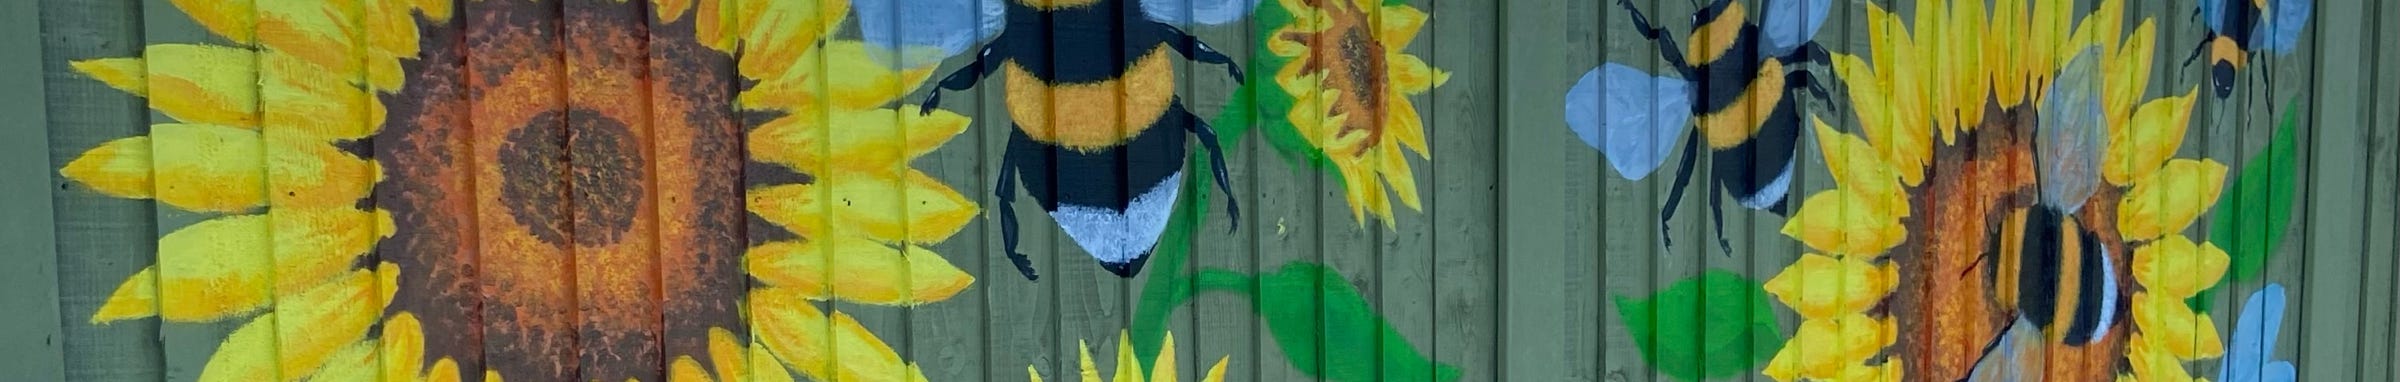 Bumble bees and Sunflowers painted on a fence